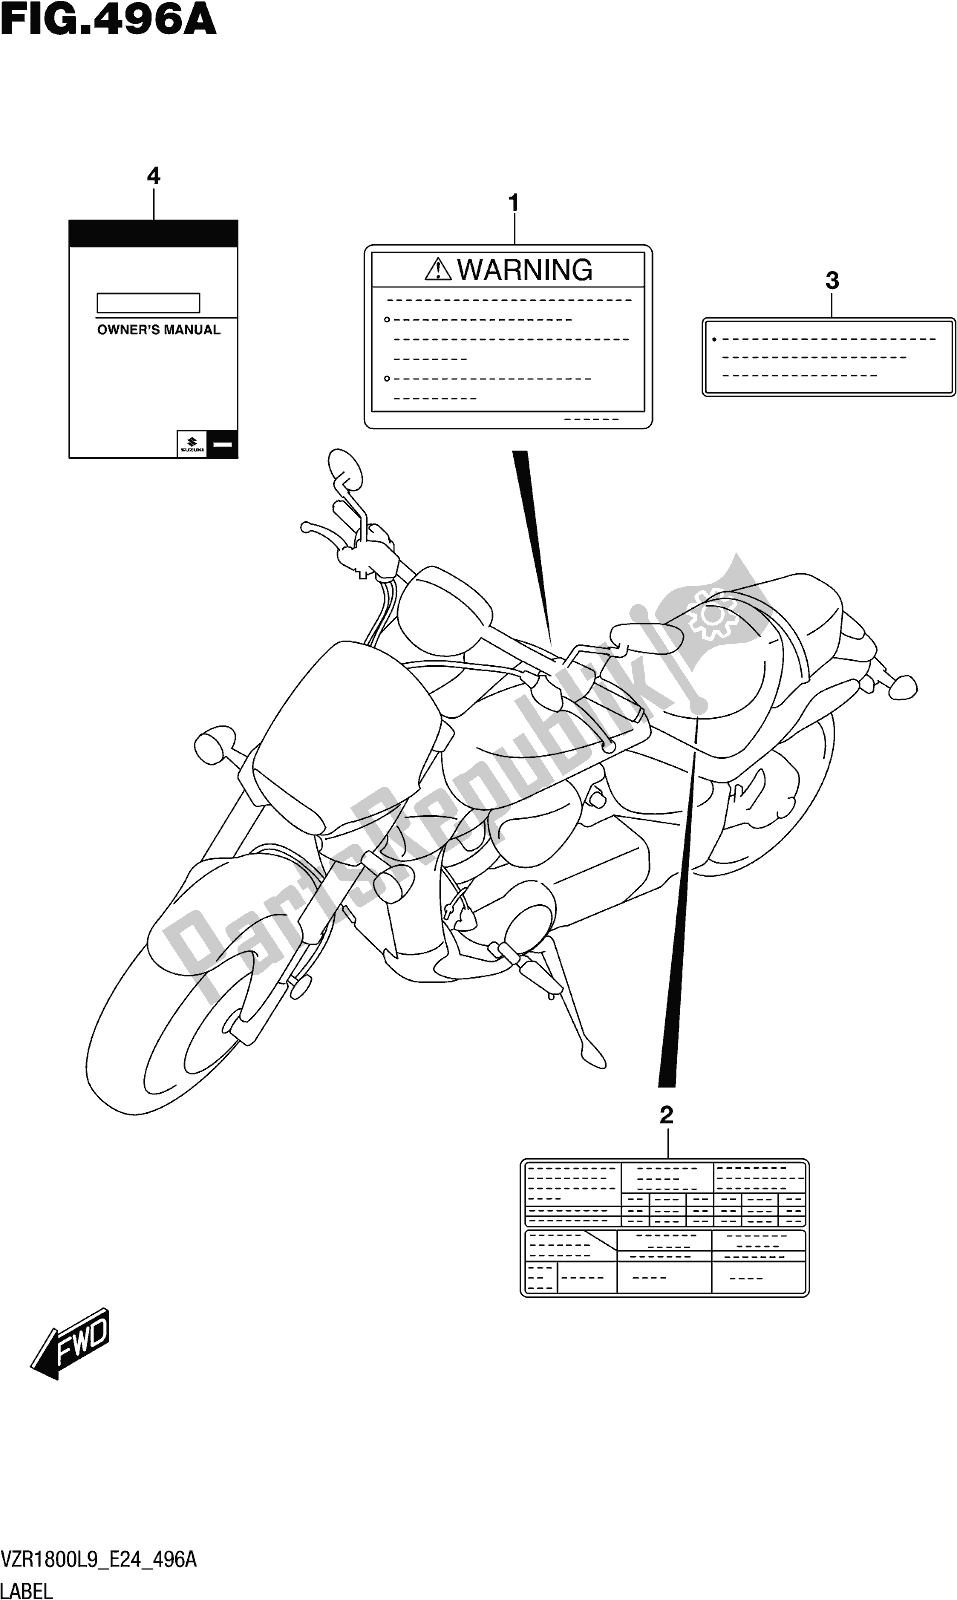 All parts for the Fig. 496a Label of the Suzuki VZR 1800 2019